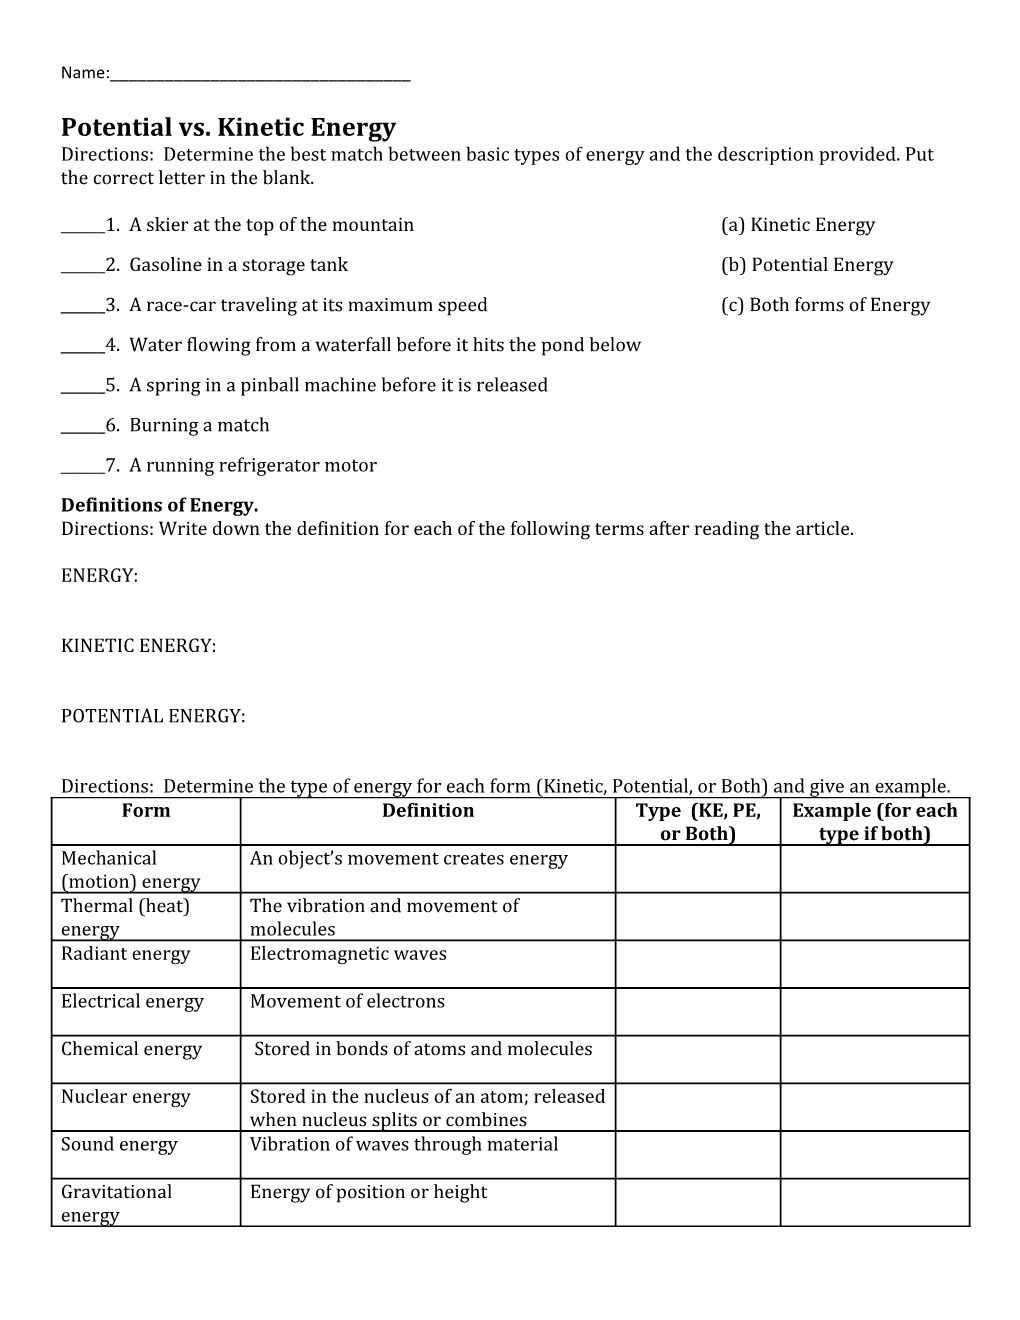 “Introduction To Energy” Worksheet